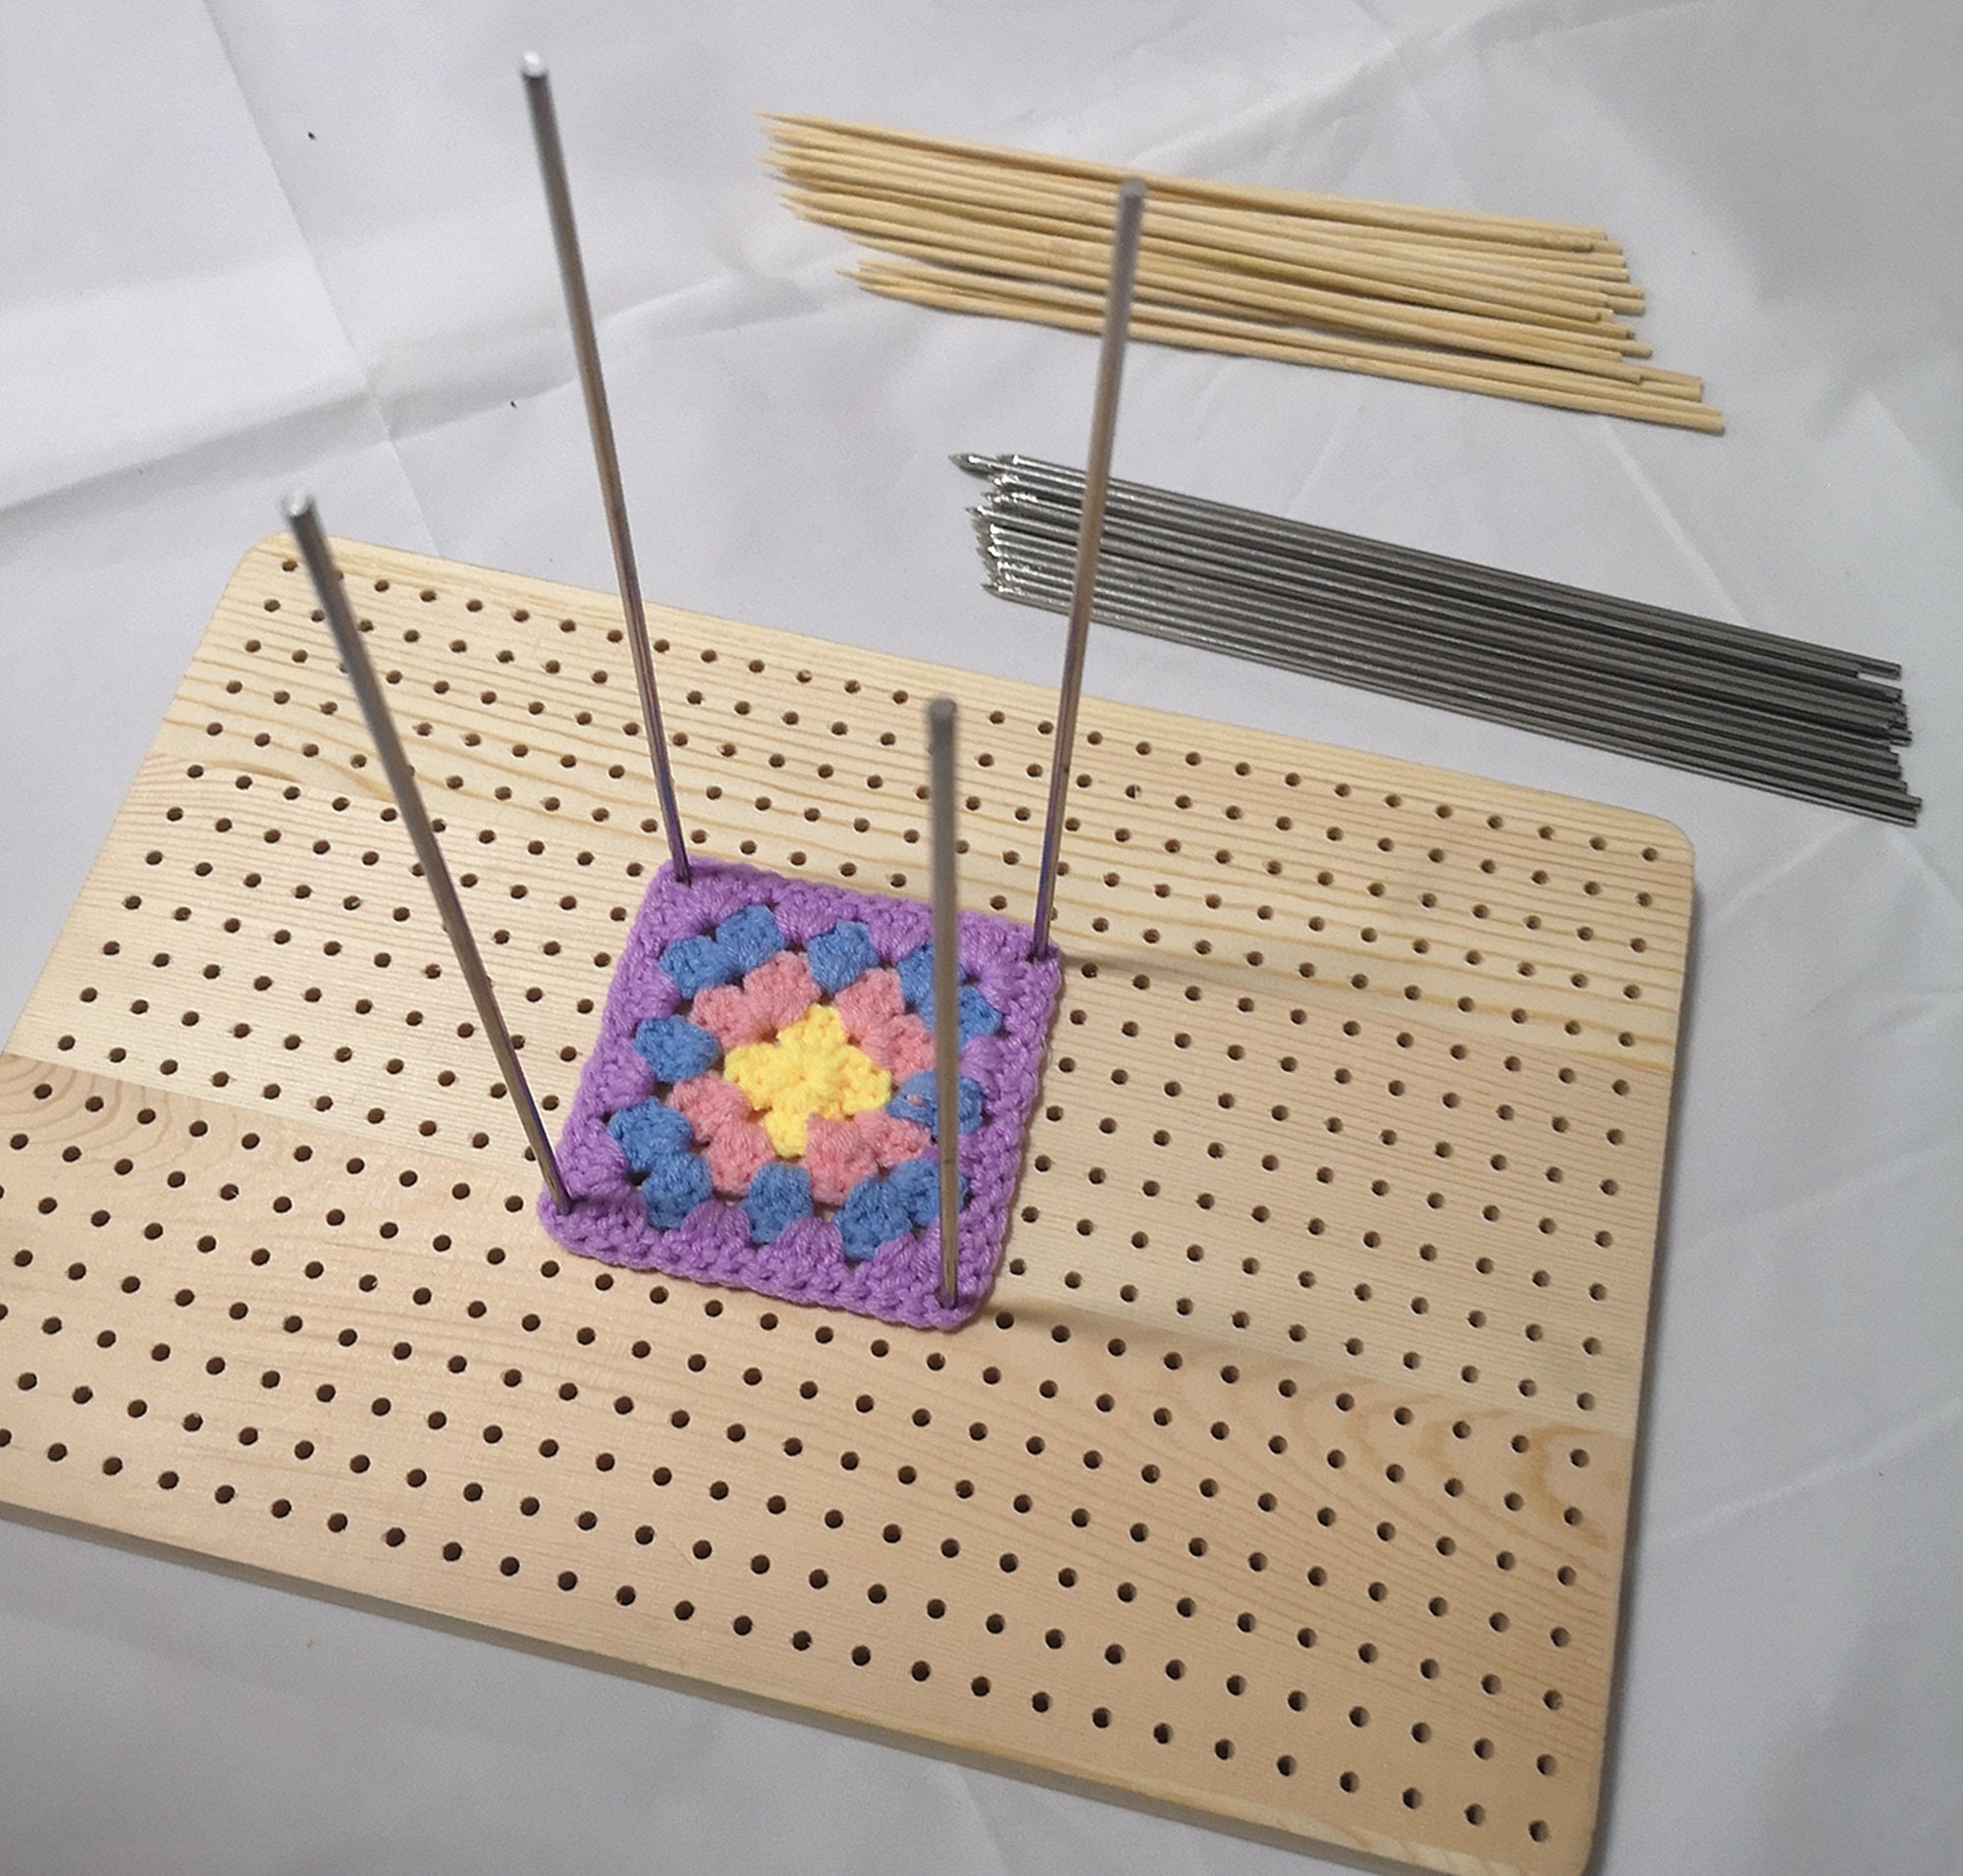 3D Printed Crochet Blocking Board Sizes up to 12 Large Crochet